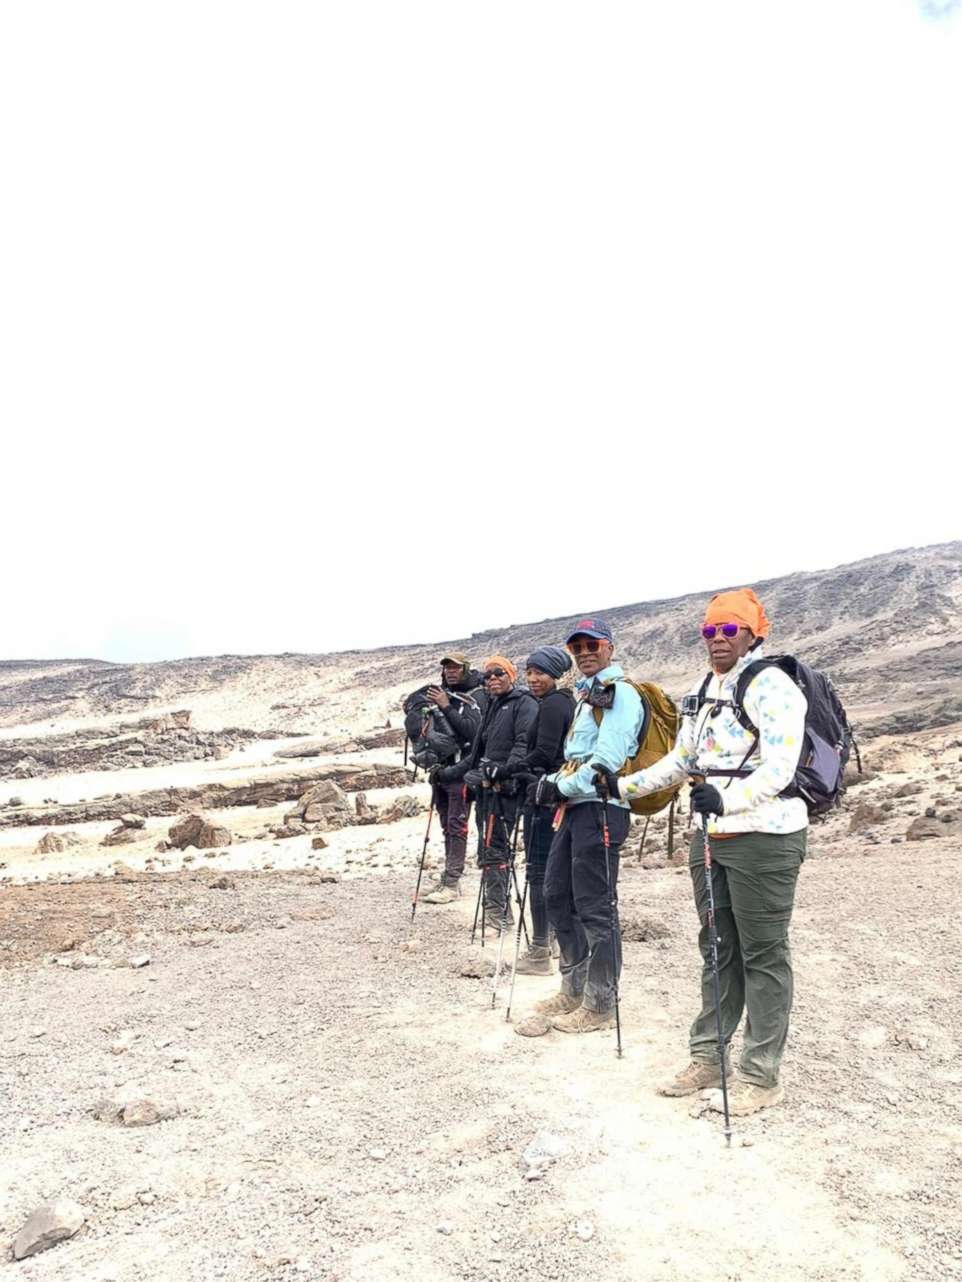 PHOTO: The trek on Mount Kilimanjaro took six days from the Shades of Favor collective's entry point to the summit.